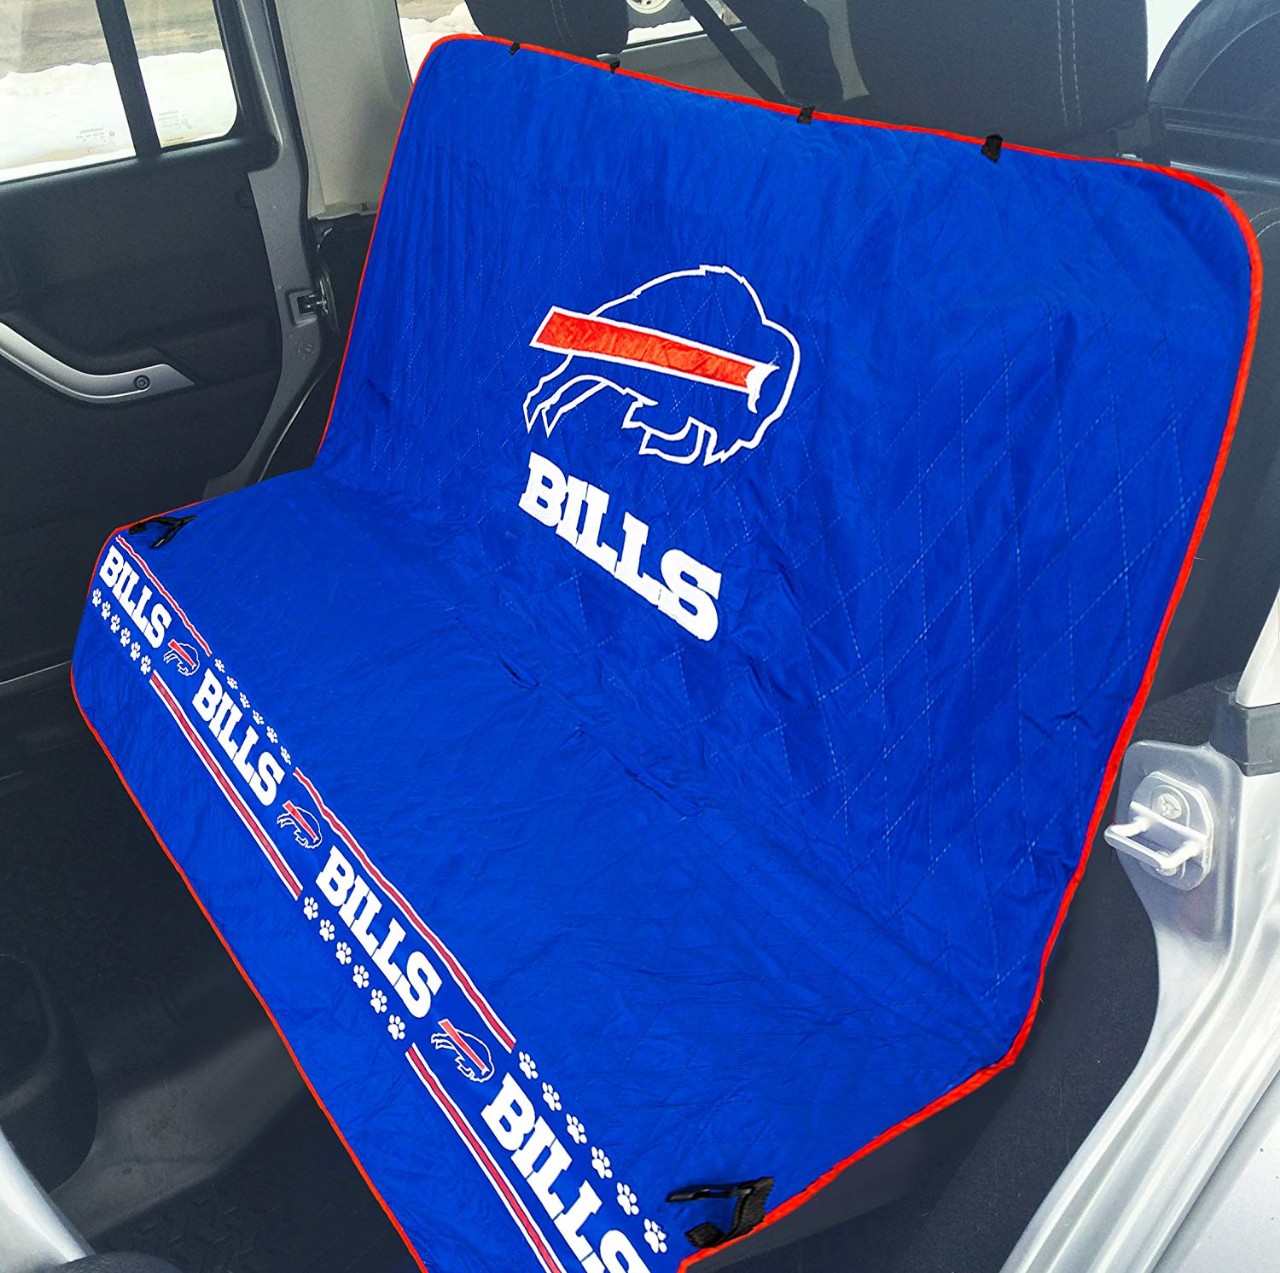 Largest Selection! 32 Football Teams Available in Seatbelts, Car Seat Covers & Much More for Dogs &